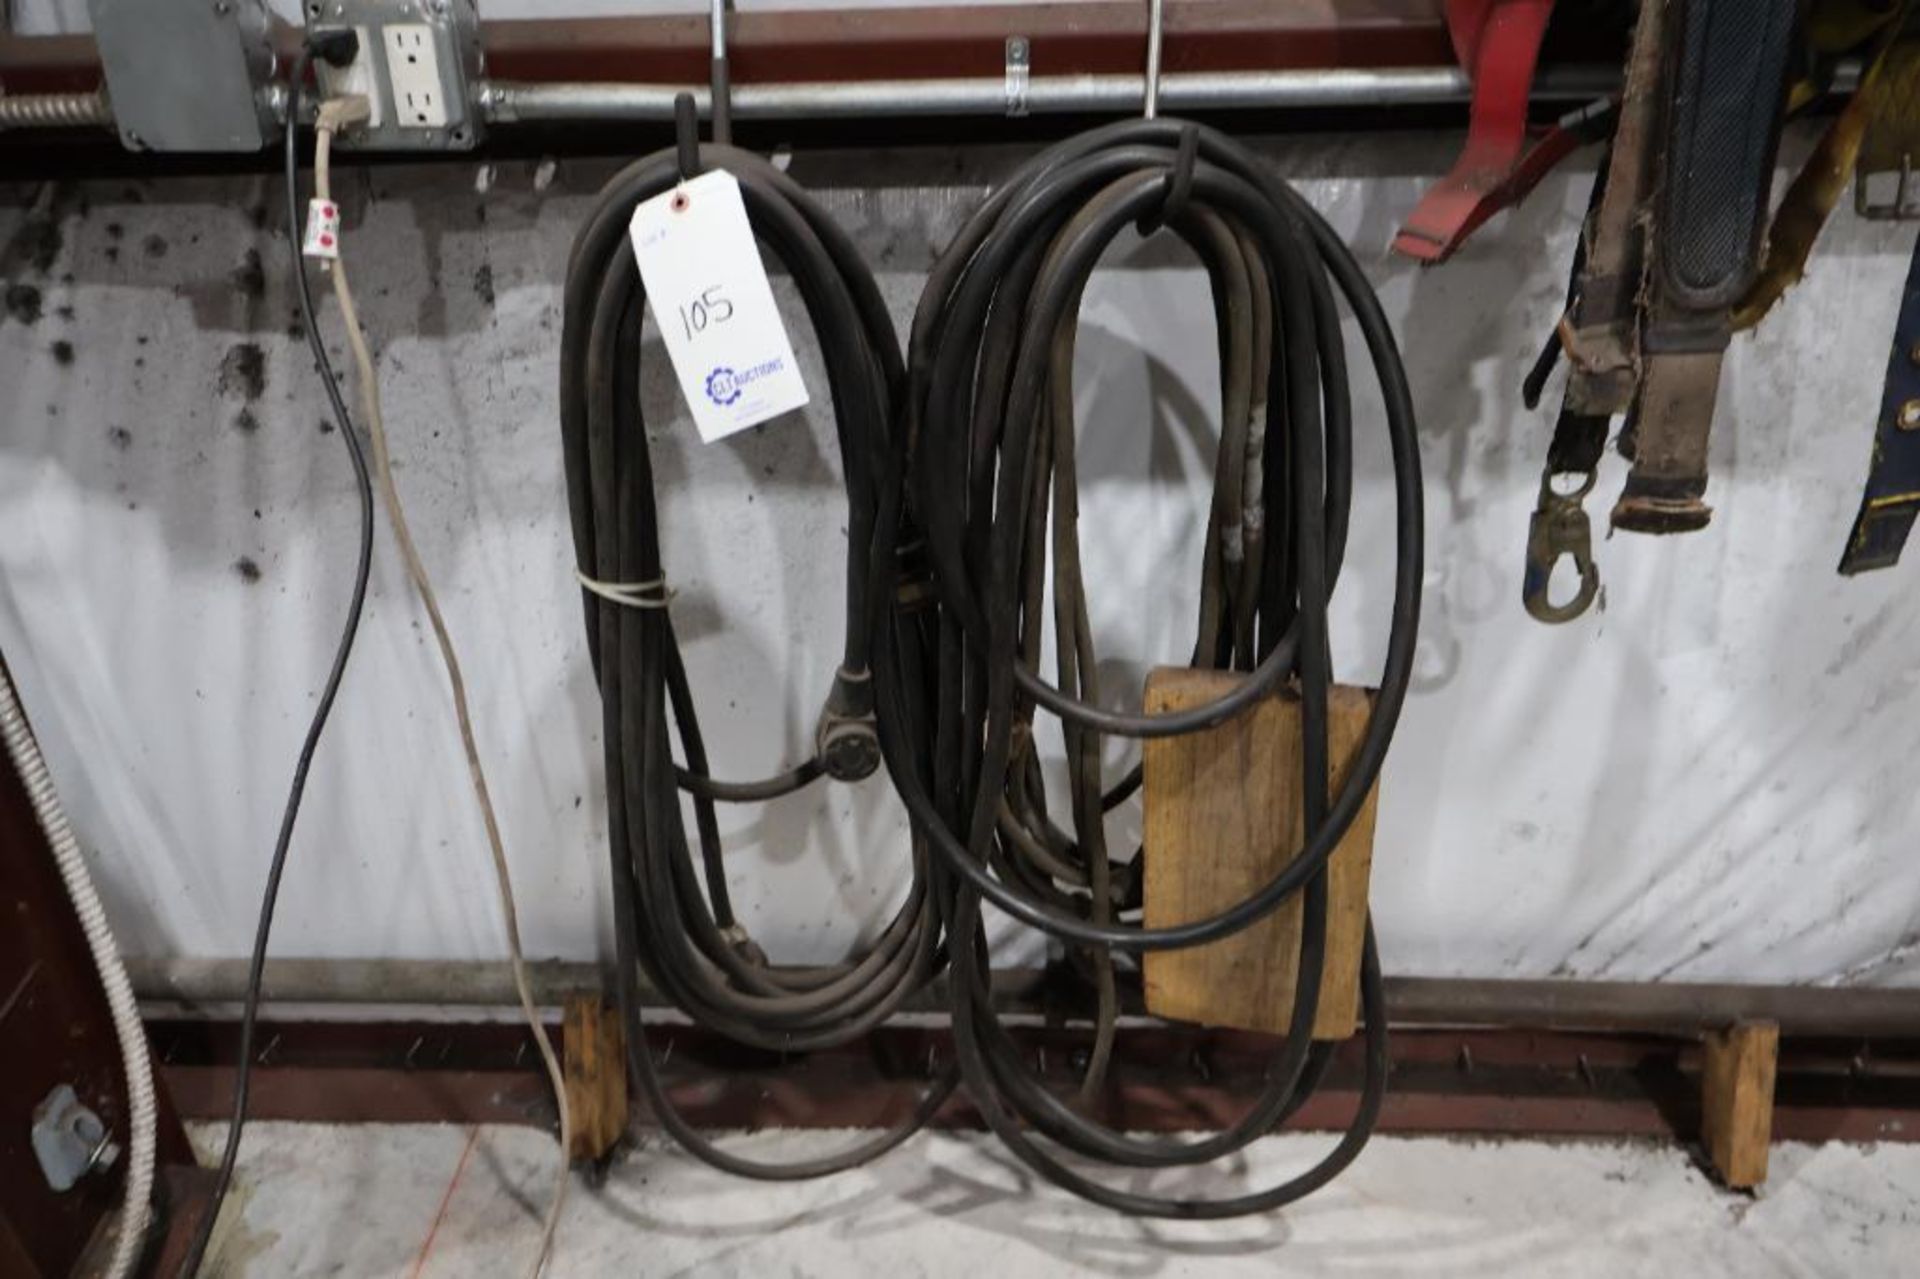 Heavy gauge extension cord - Image 2 of 2